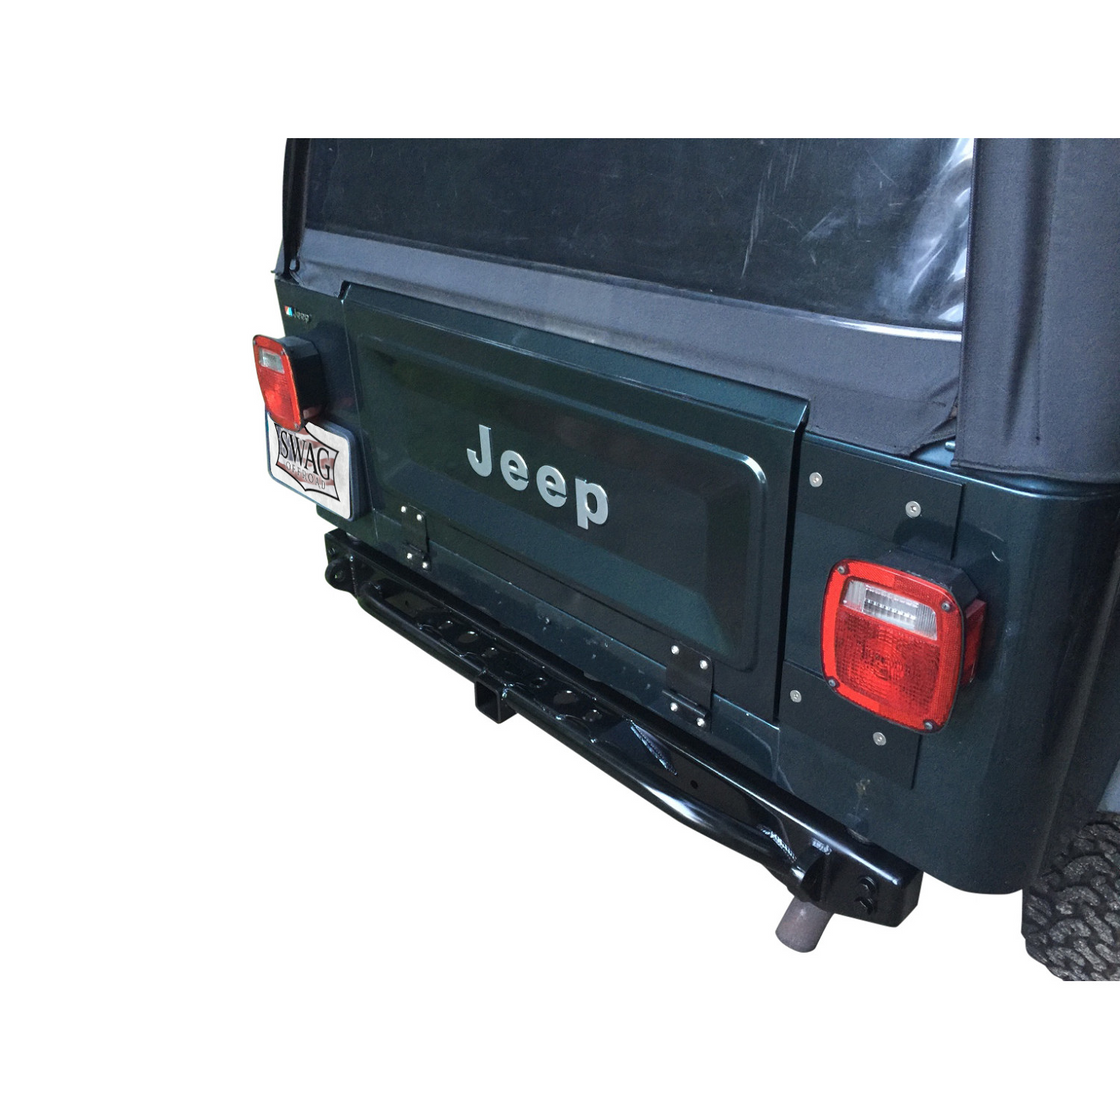 SWAG CJ Tailgate Conversion Kit for your TJ or YJ